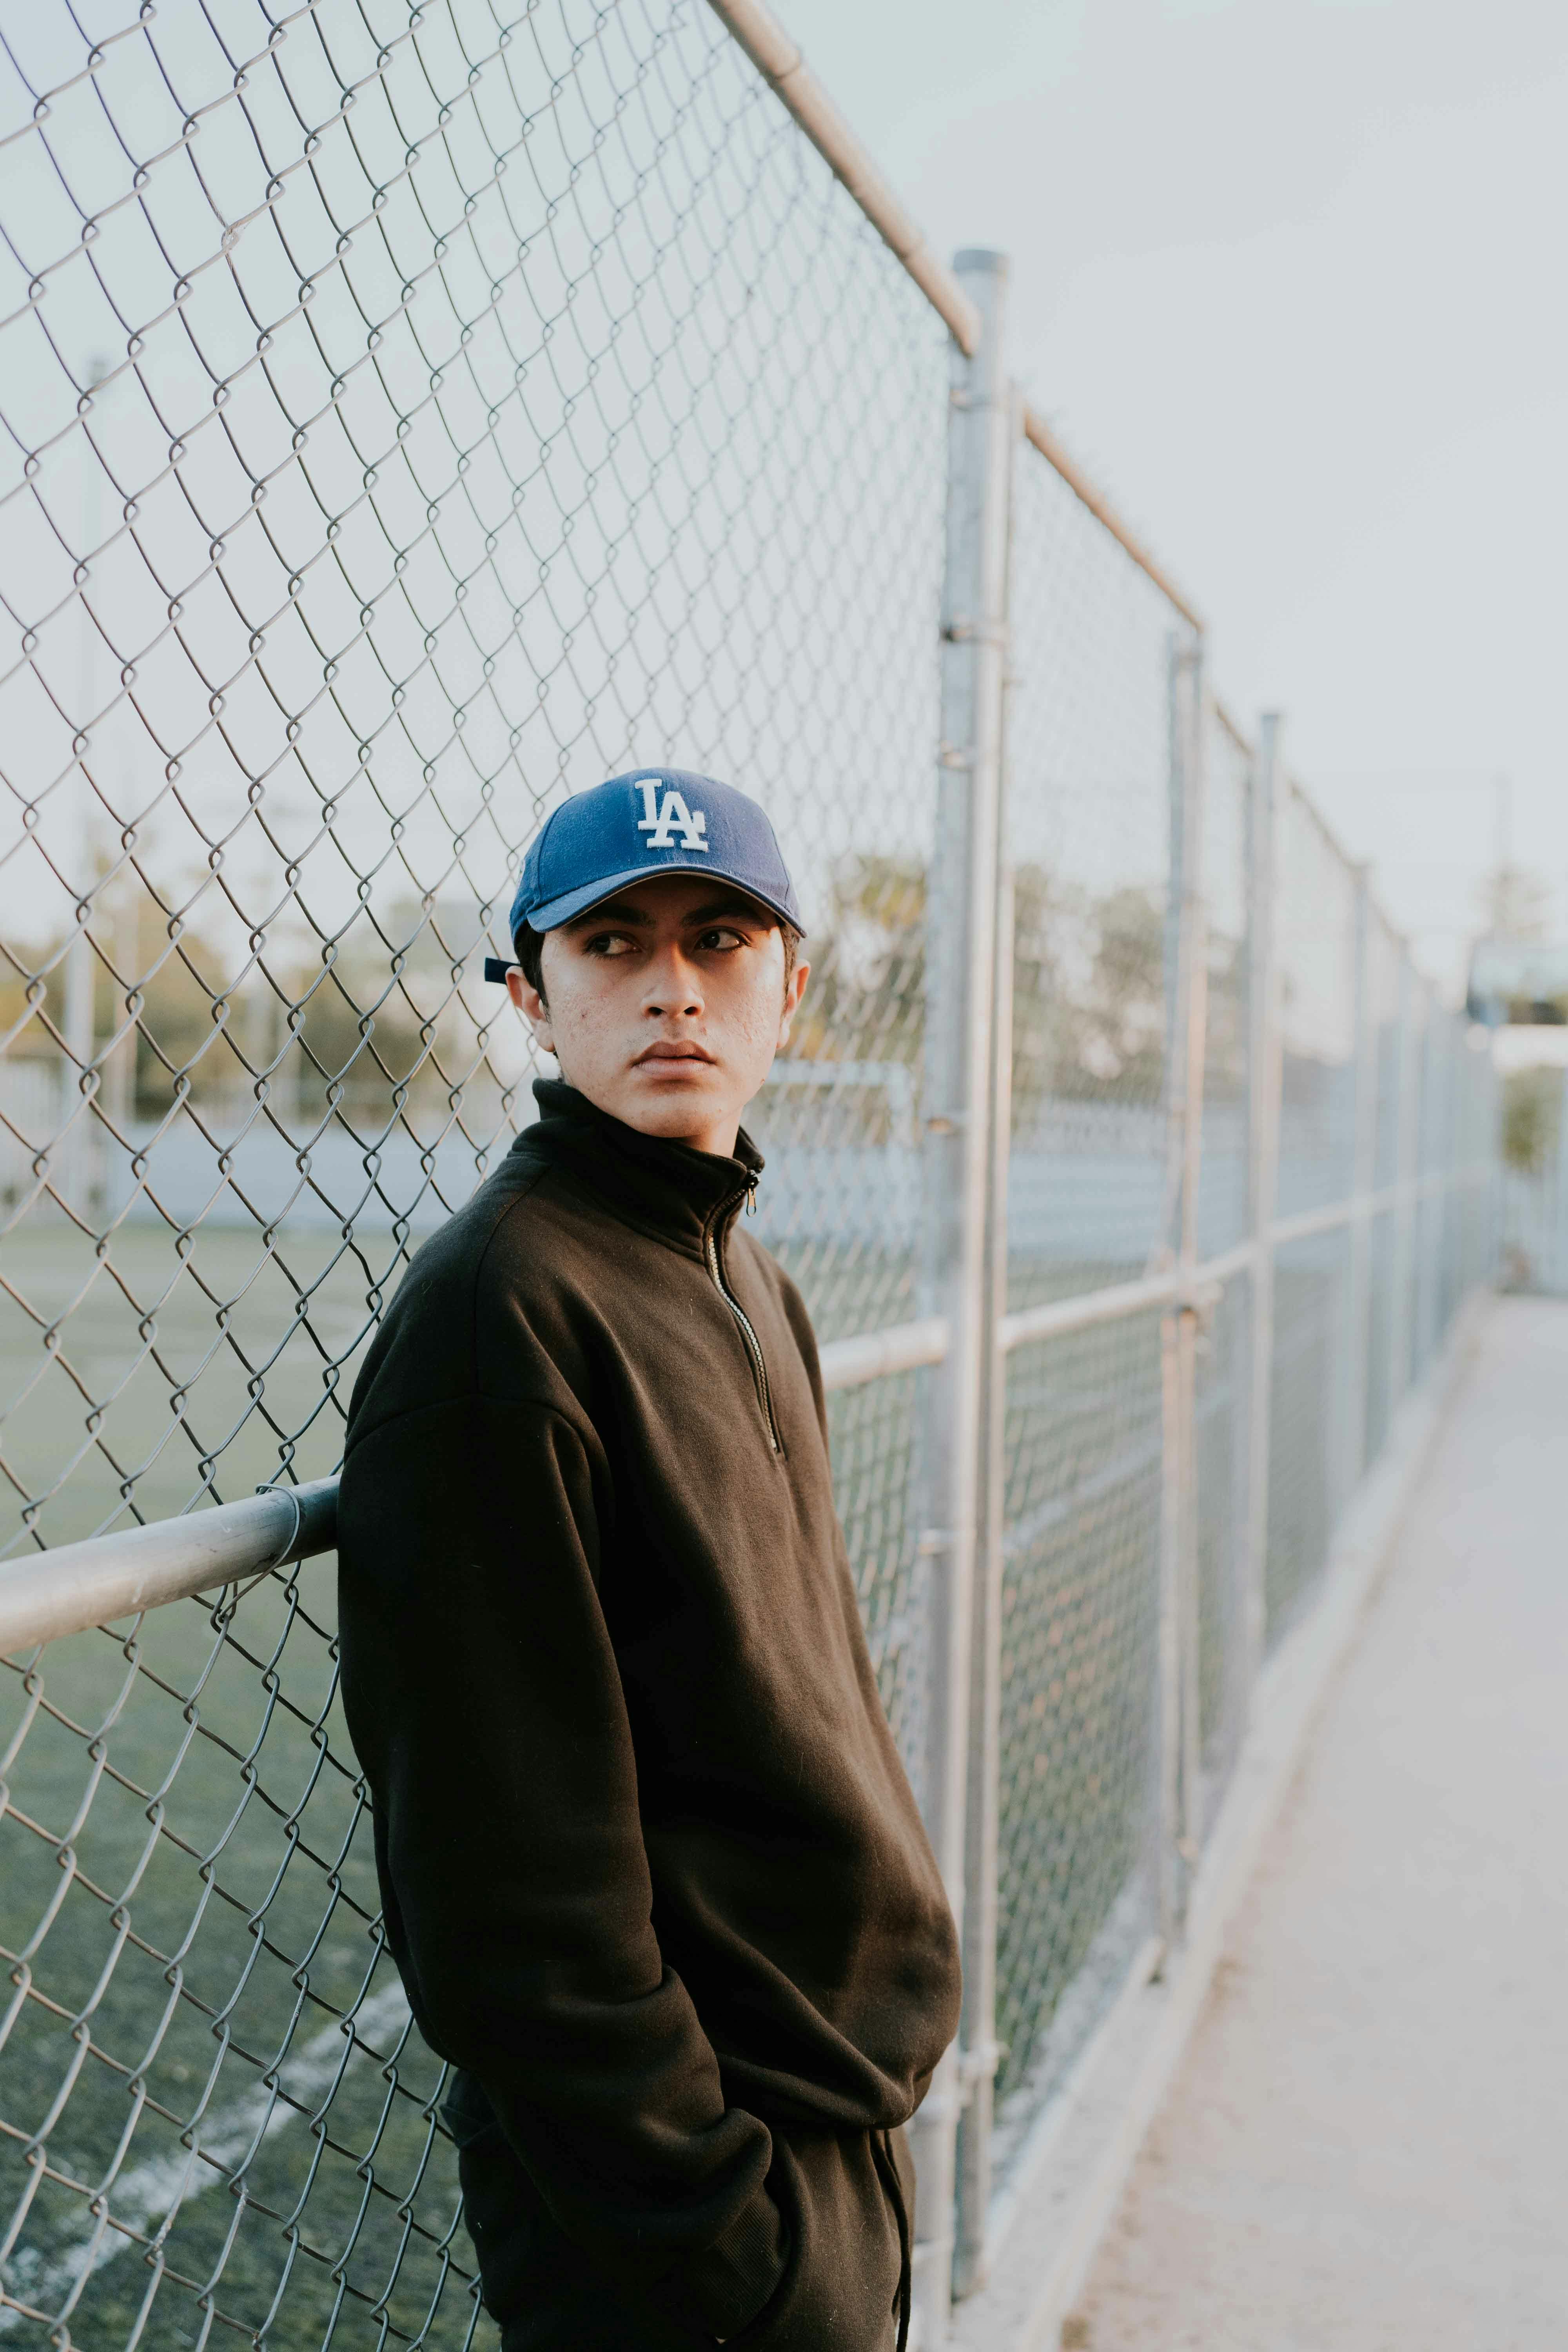 man in a sweatshirt and a cap by a chain link fence